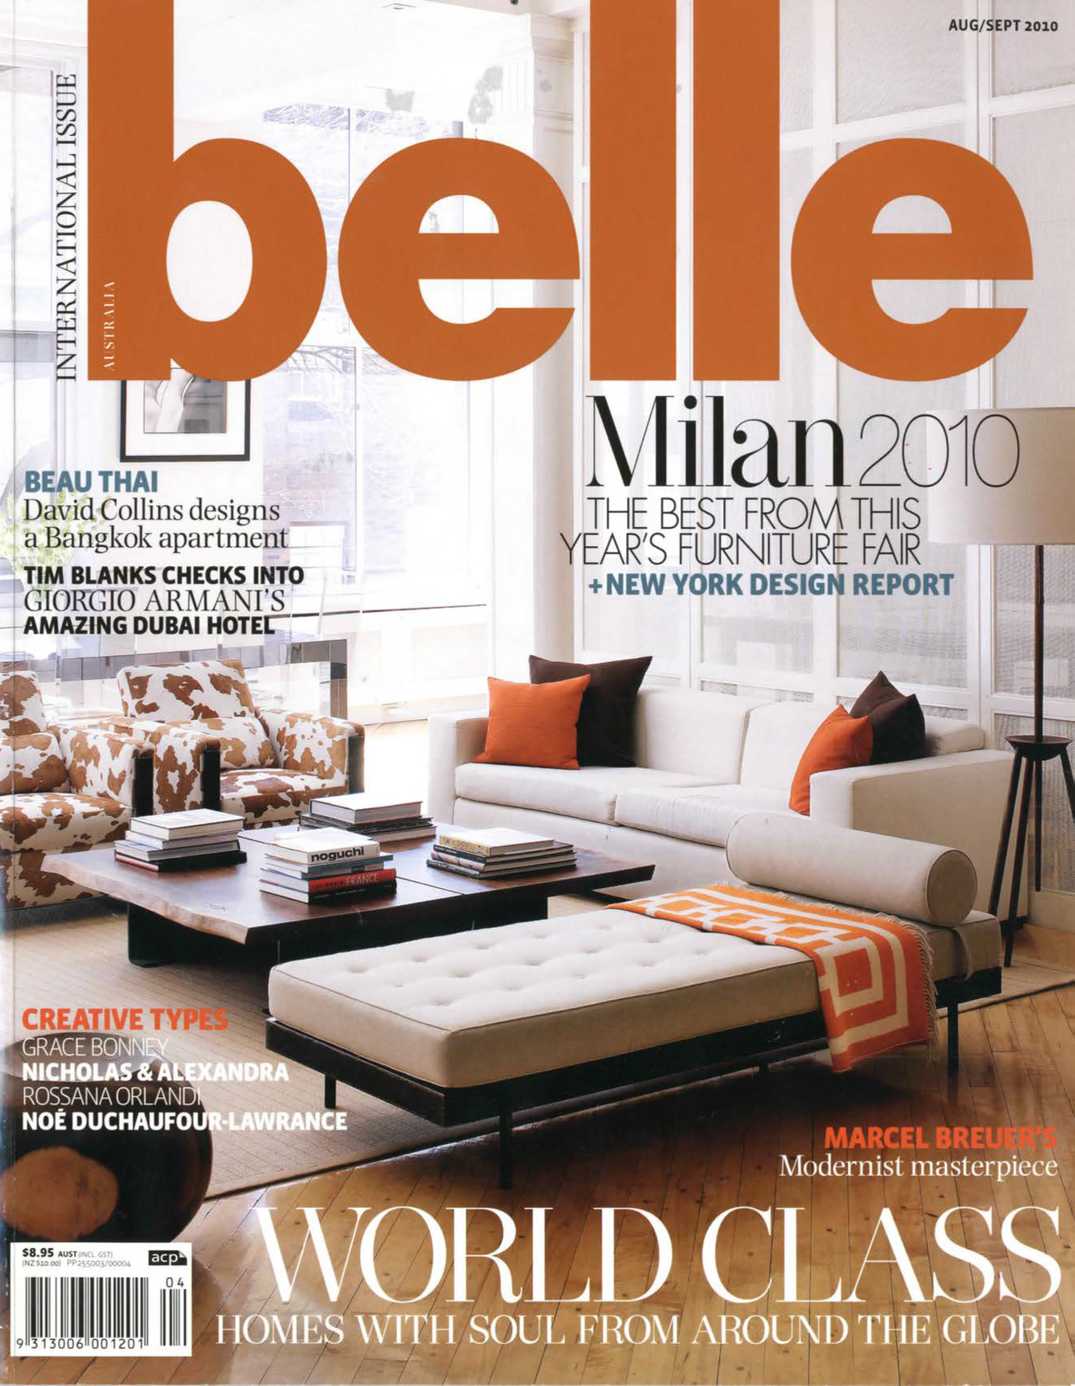 Article in Belle Mag - issue of August 2010 - cover